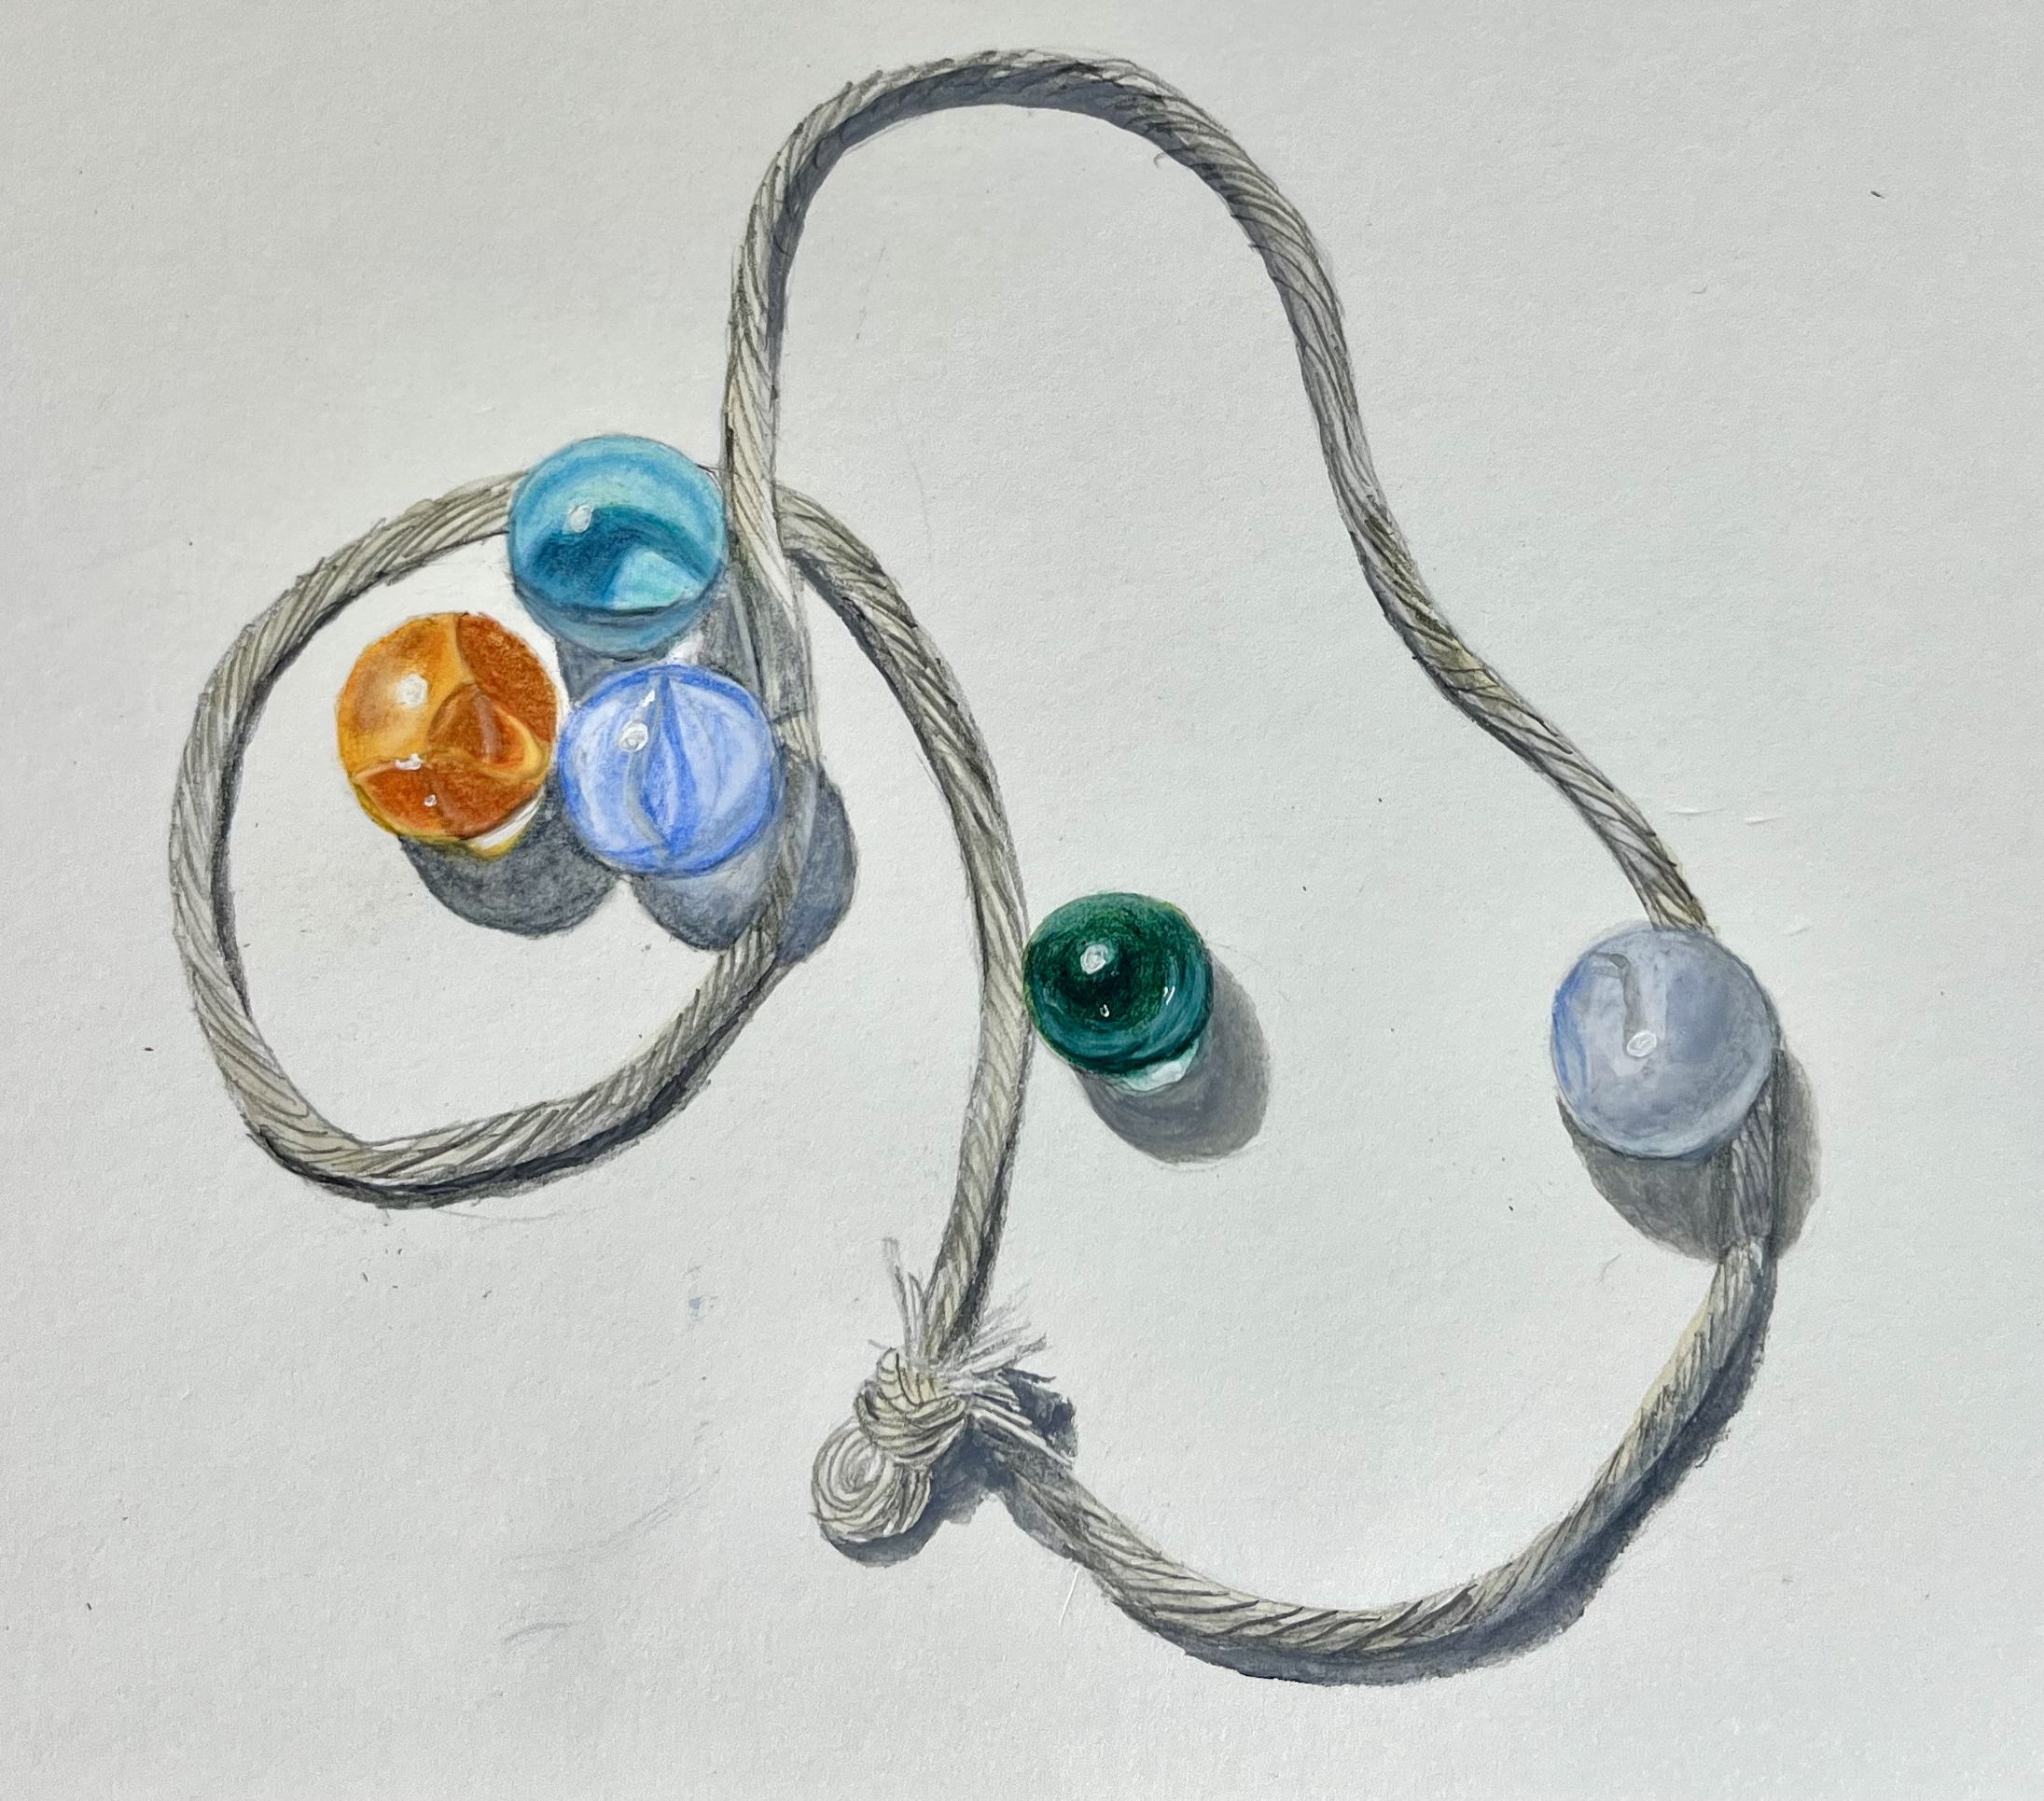 String and marbles, study in realism